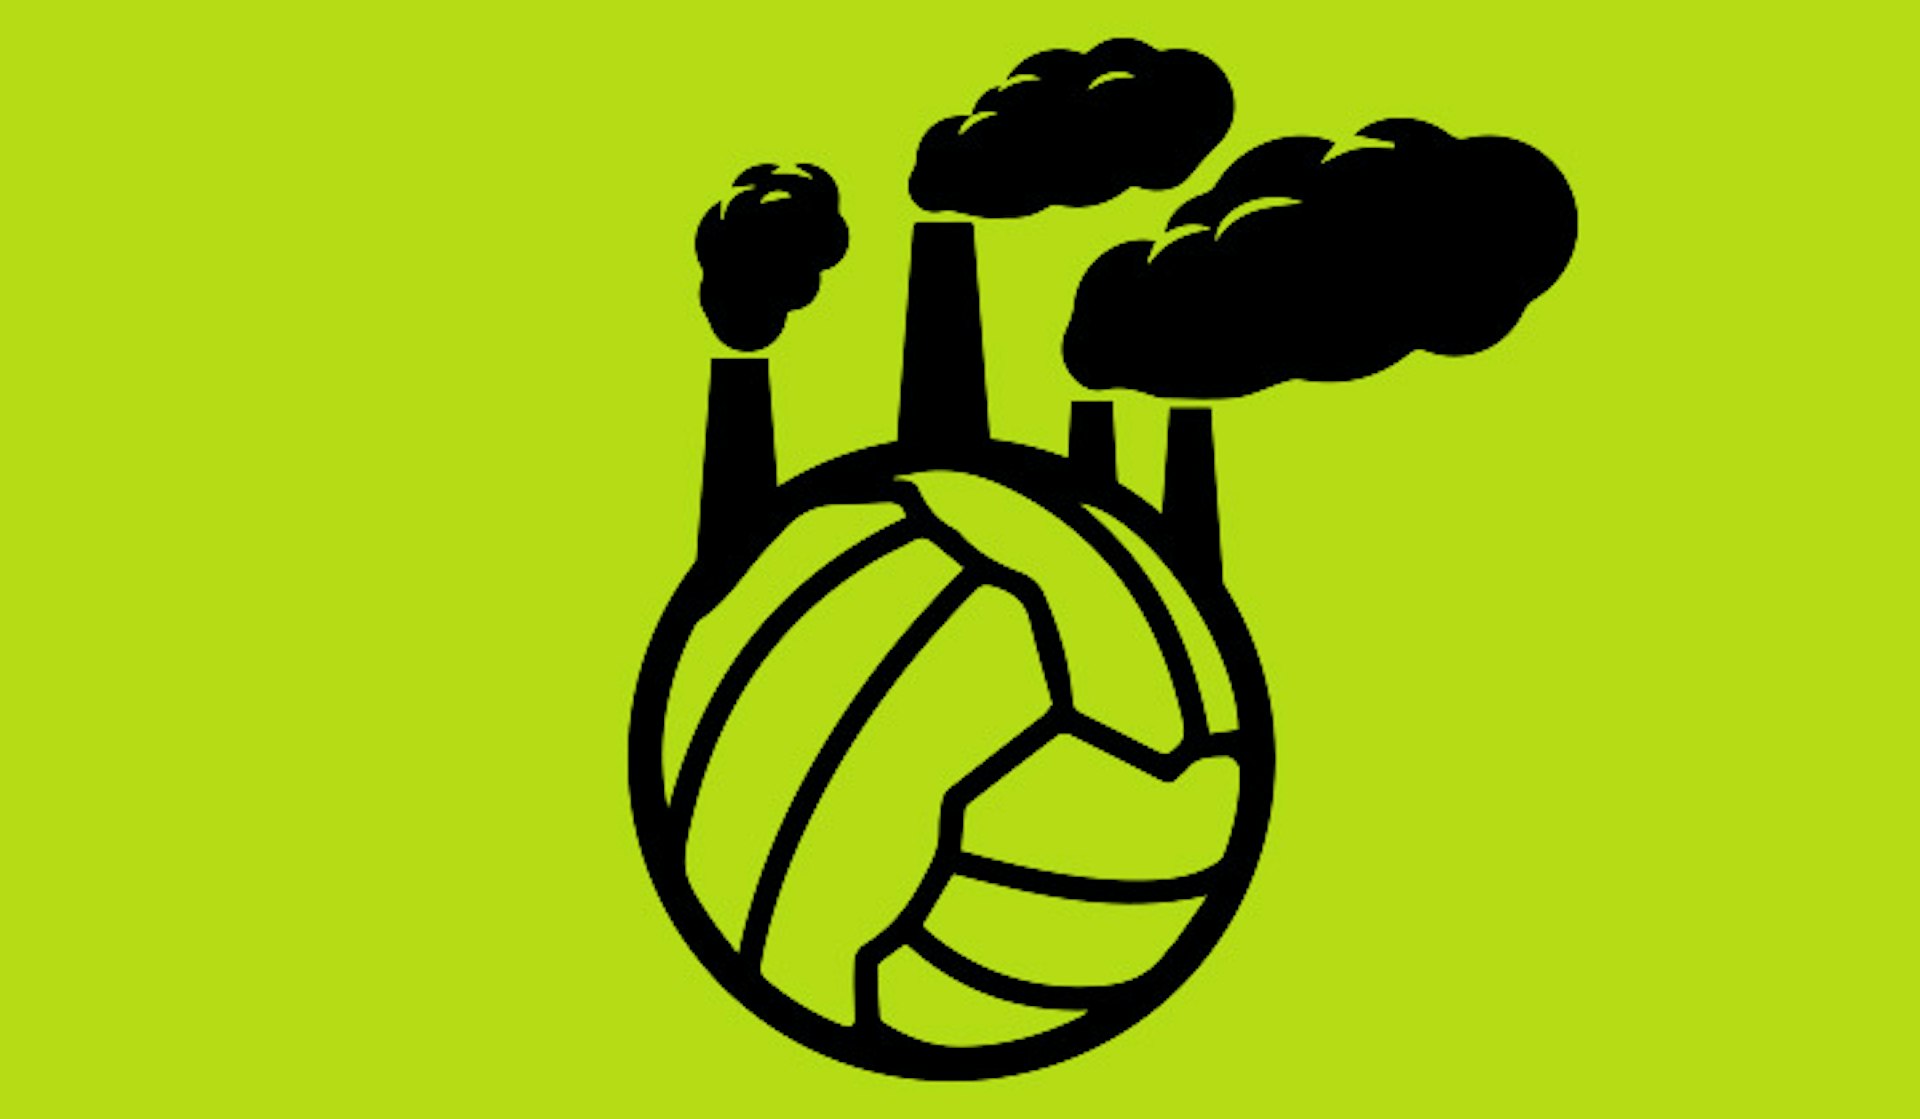 It's time for football to reckon with its carbon footprint